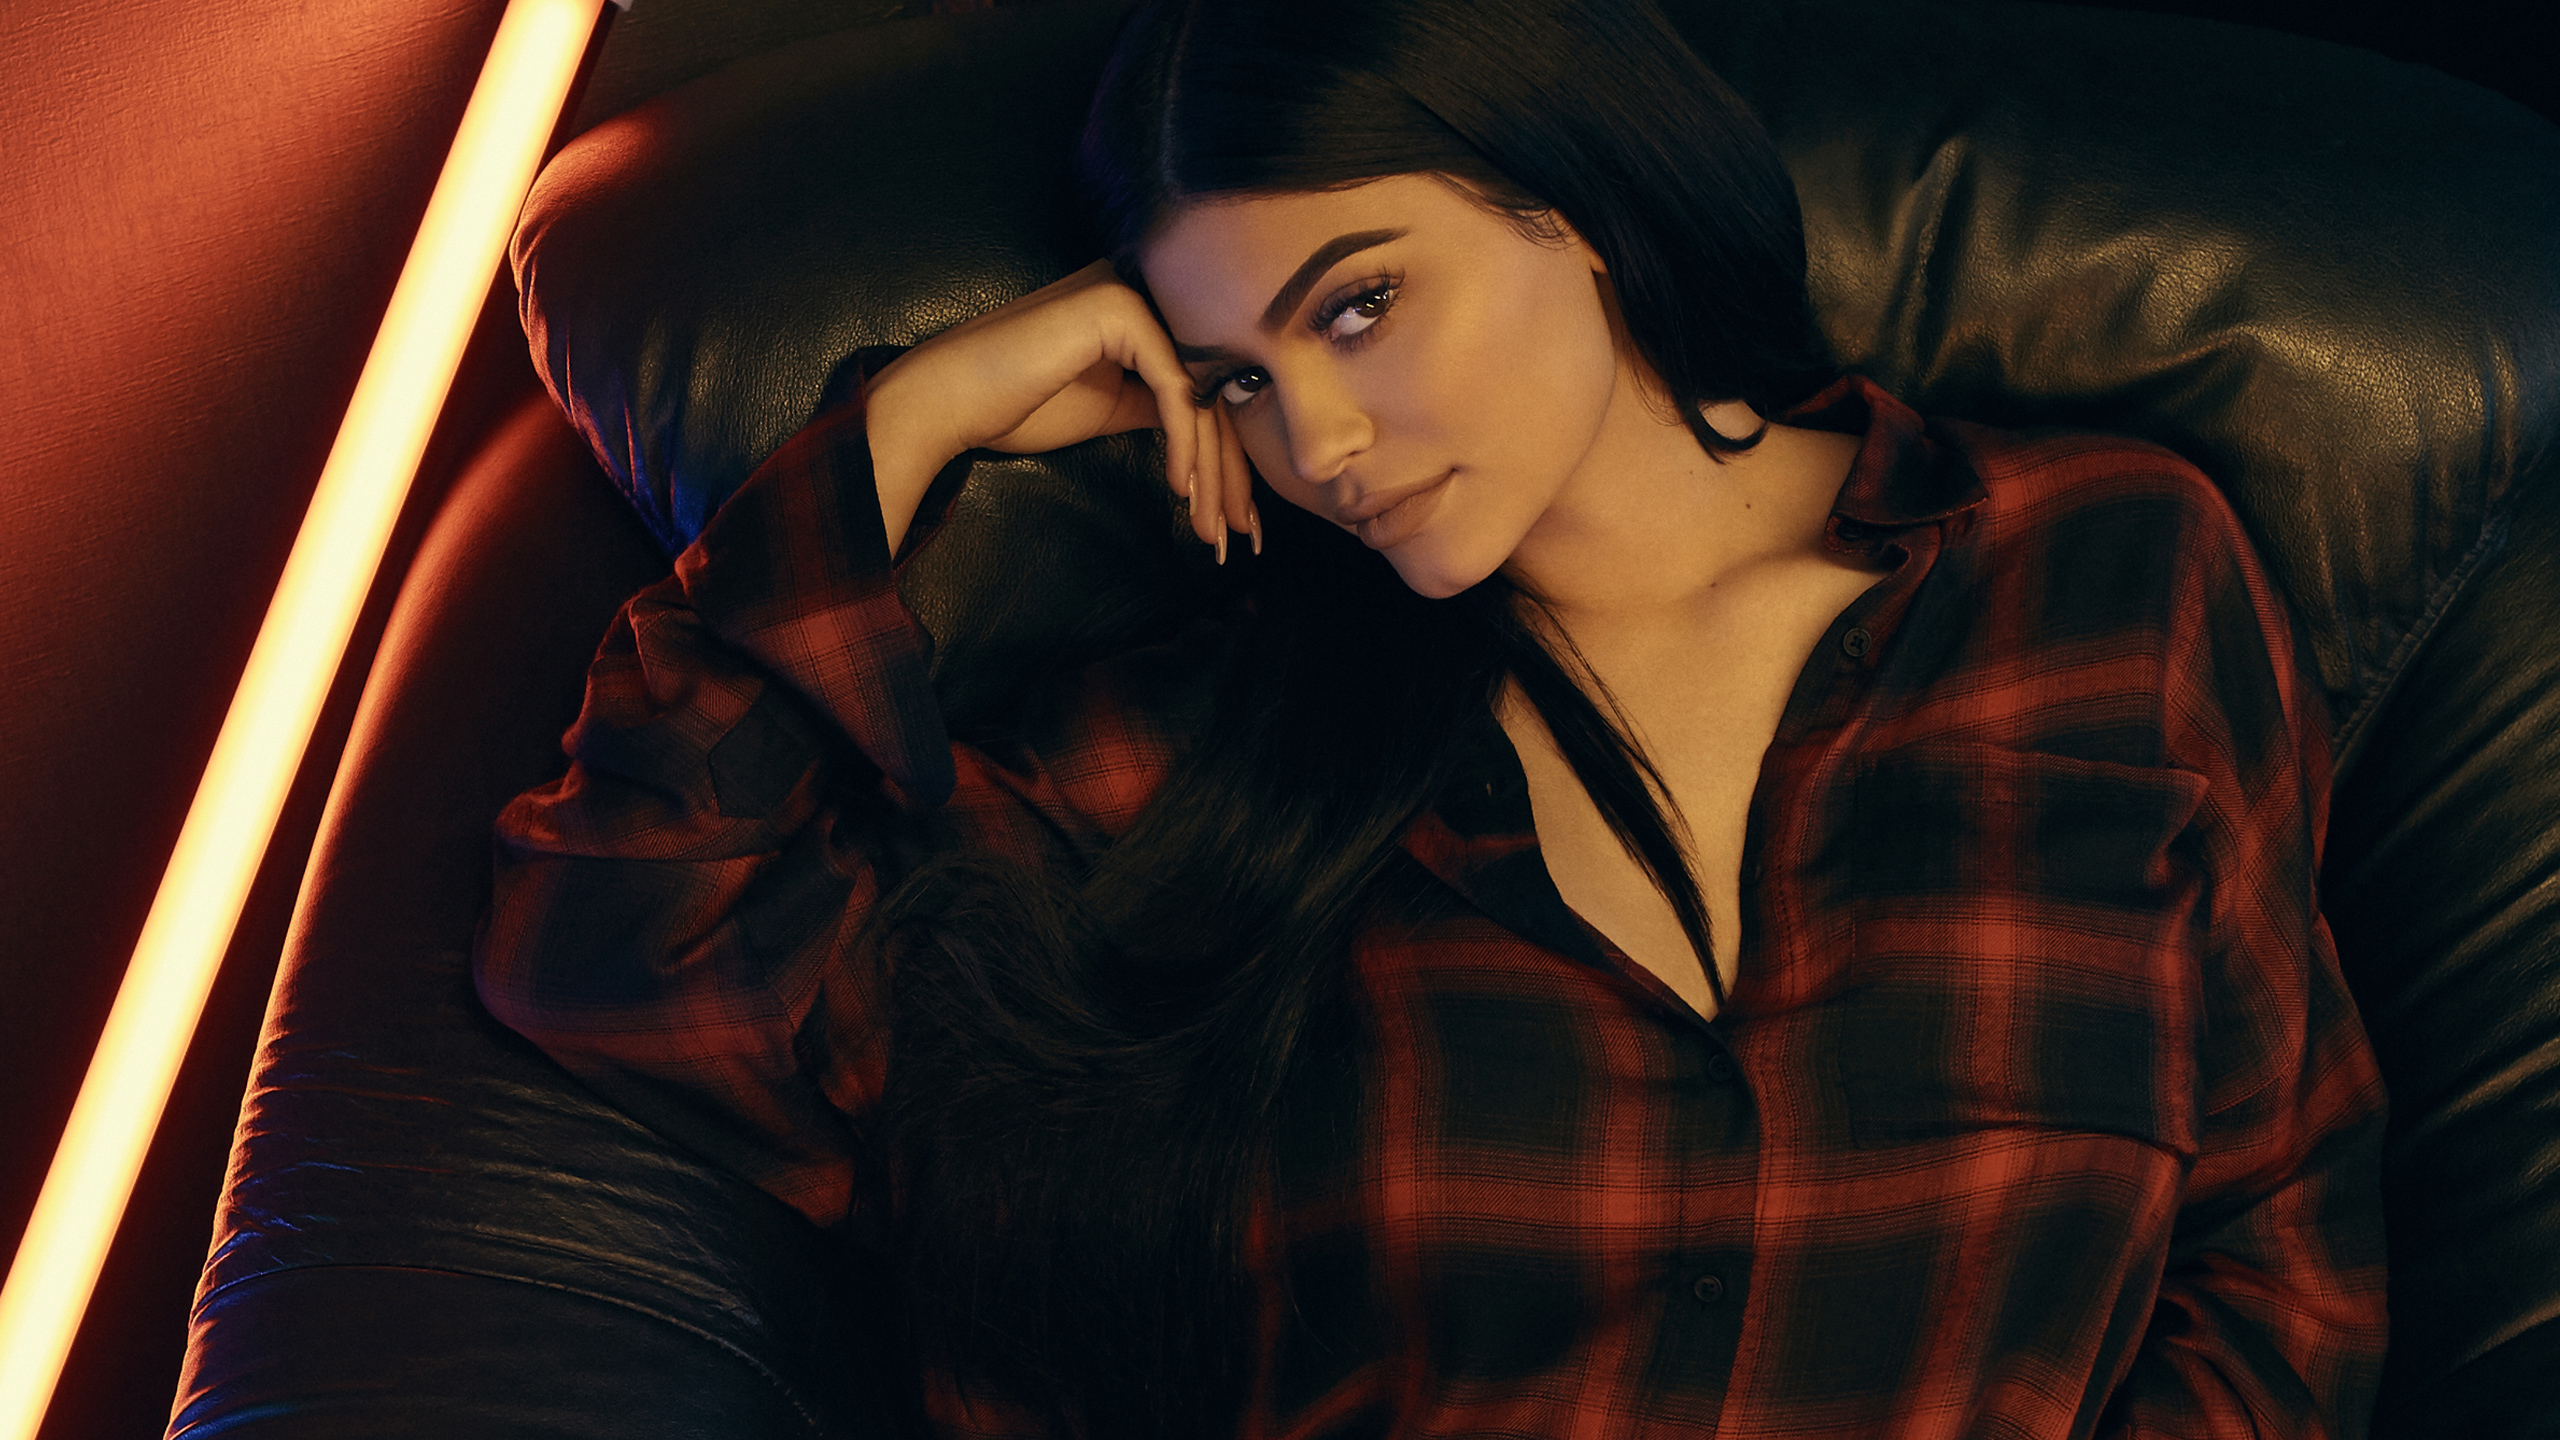 Kylie Jenner 22 Wallpapers